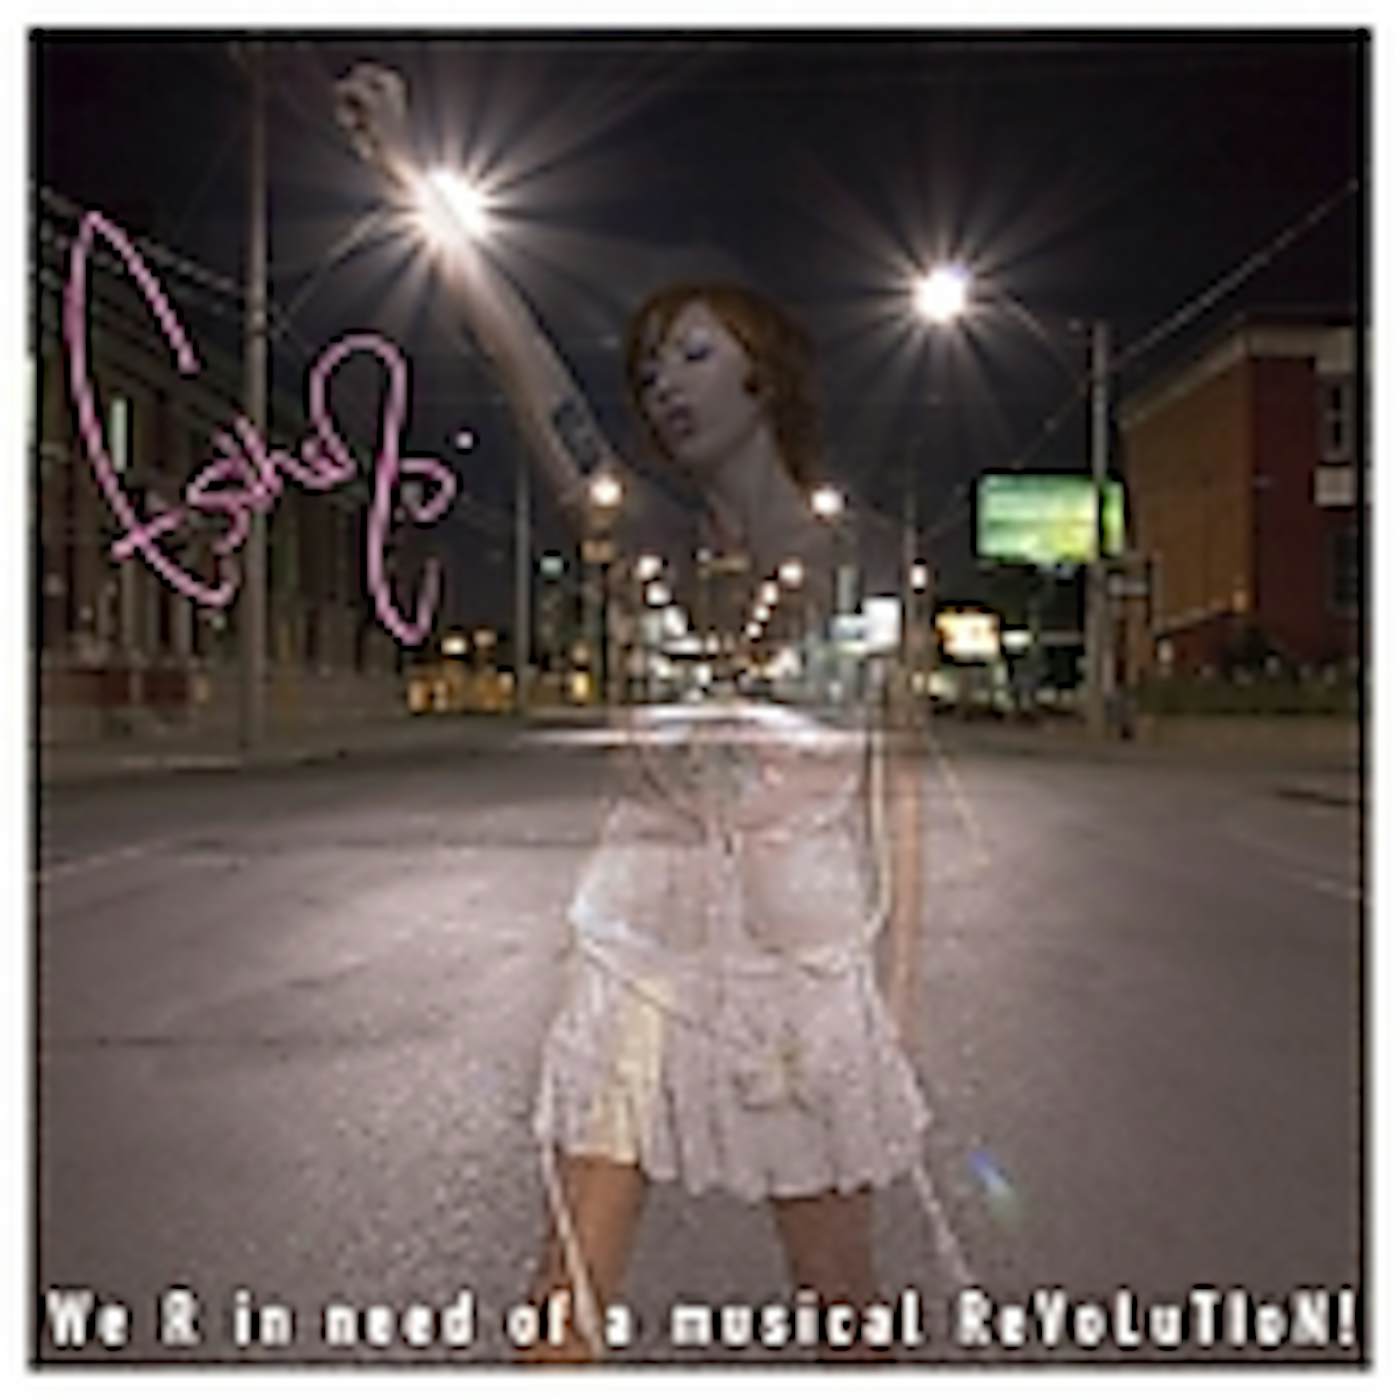 Esthero WE R IN NEED OF A MUSICAL REVOLUTION CD